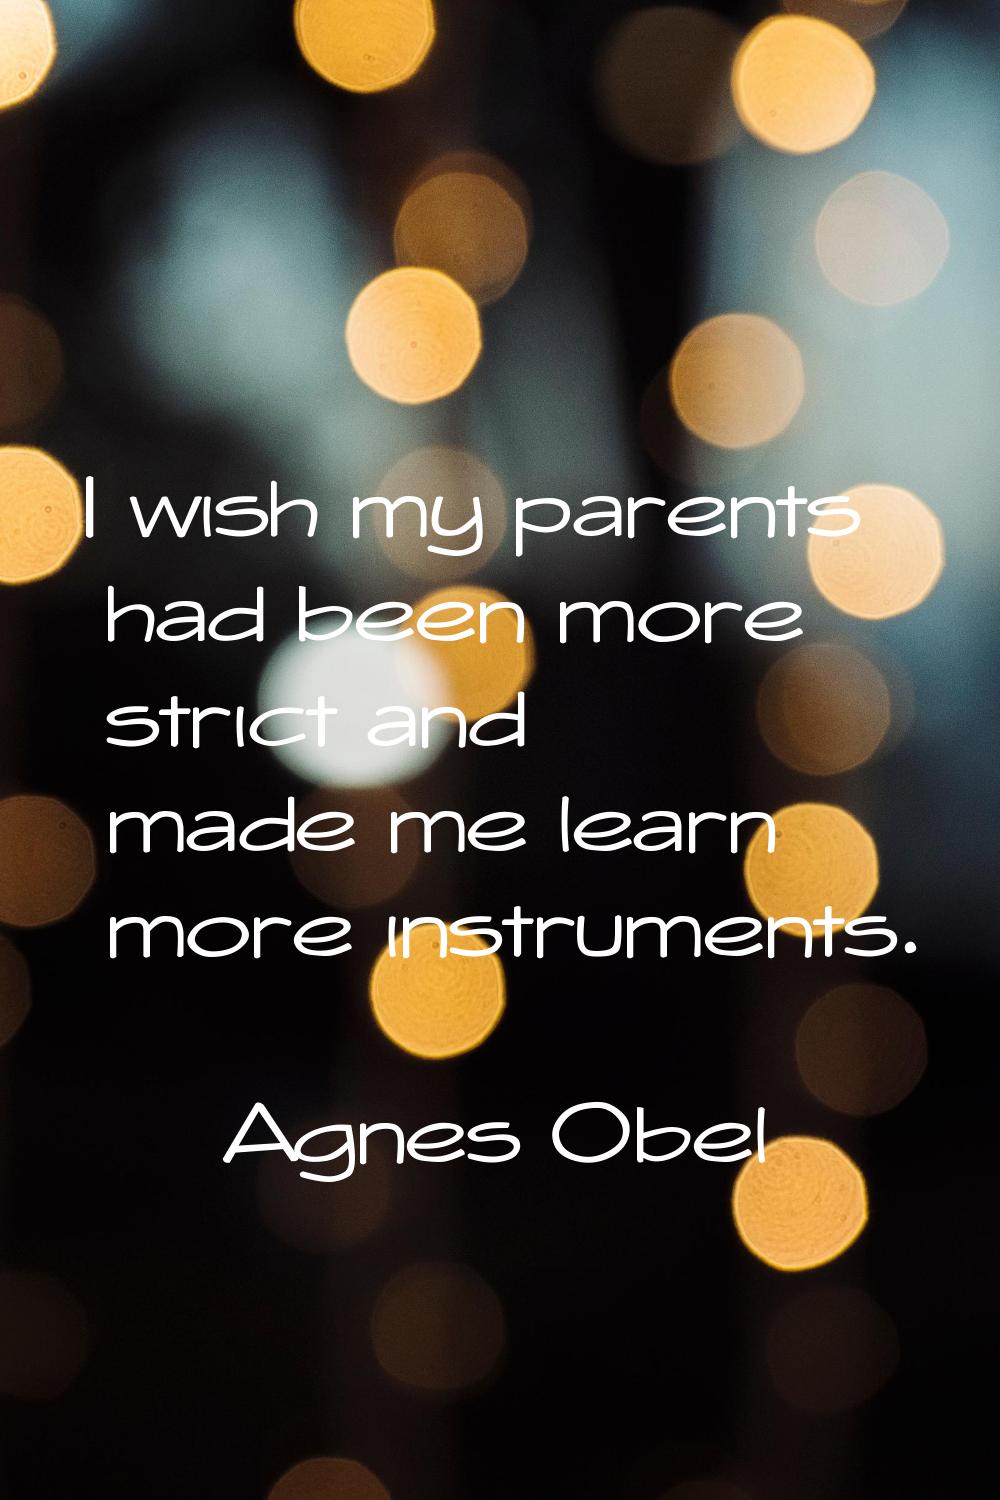 I wish my parents had been more strict and made me learn more instruments.